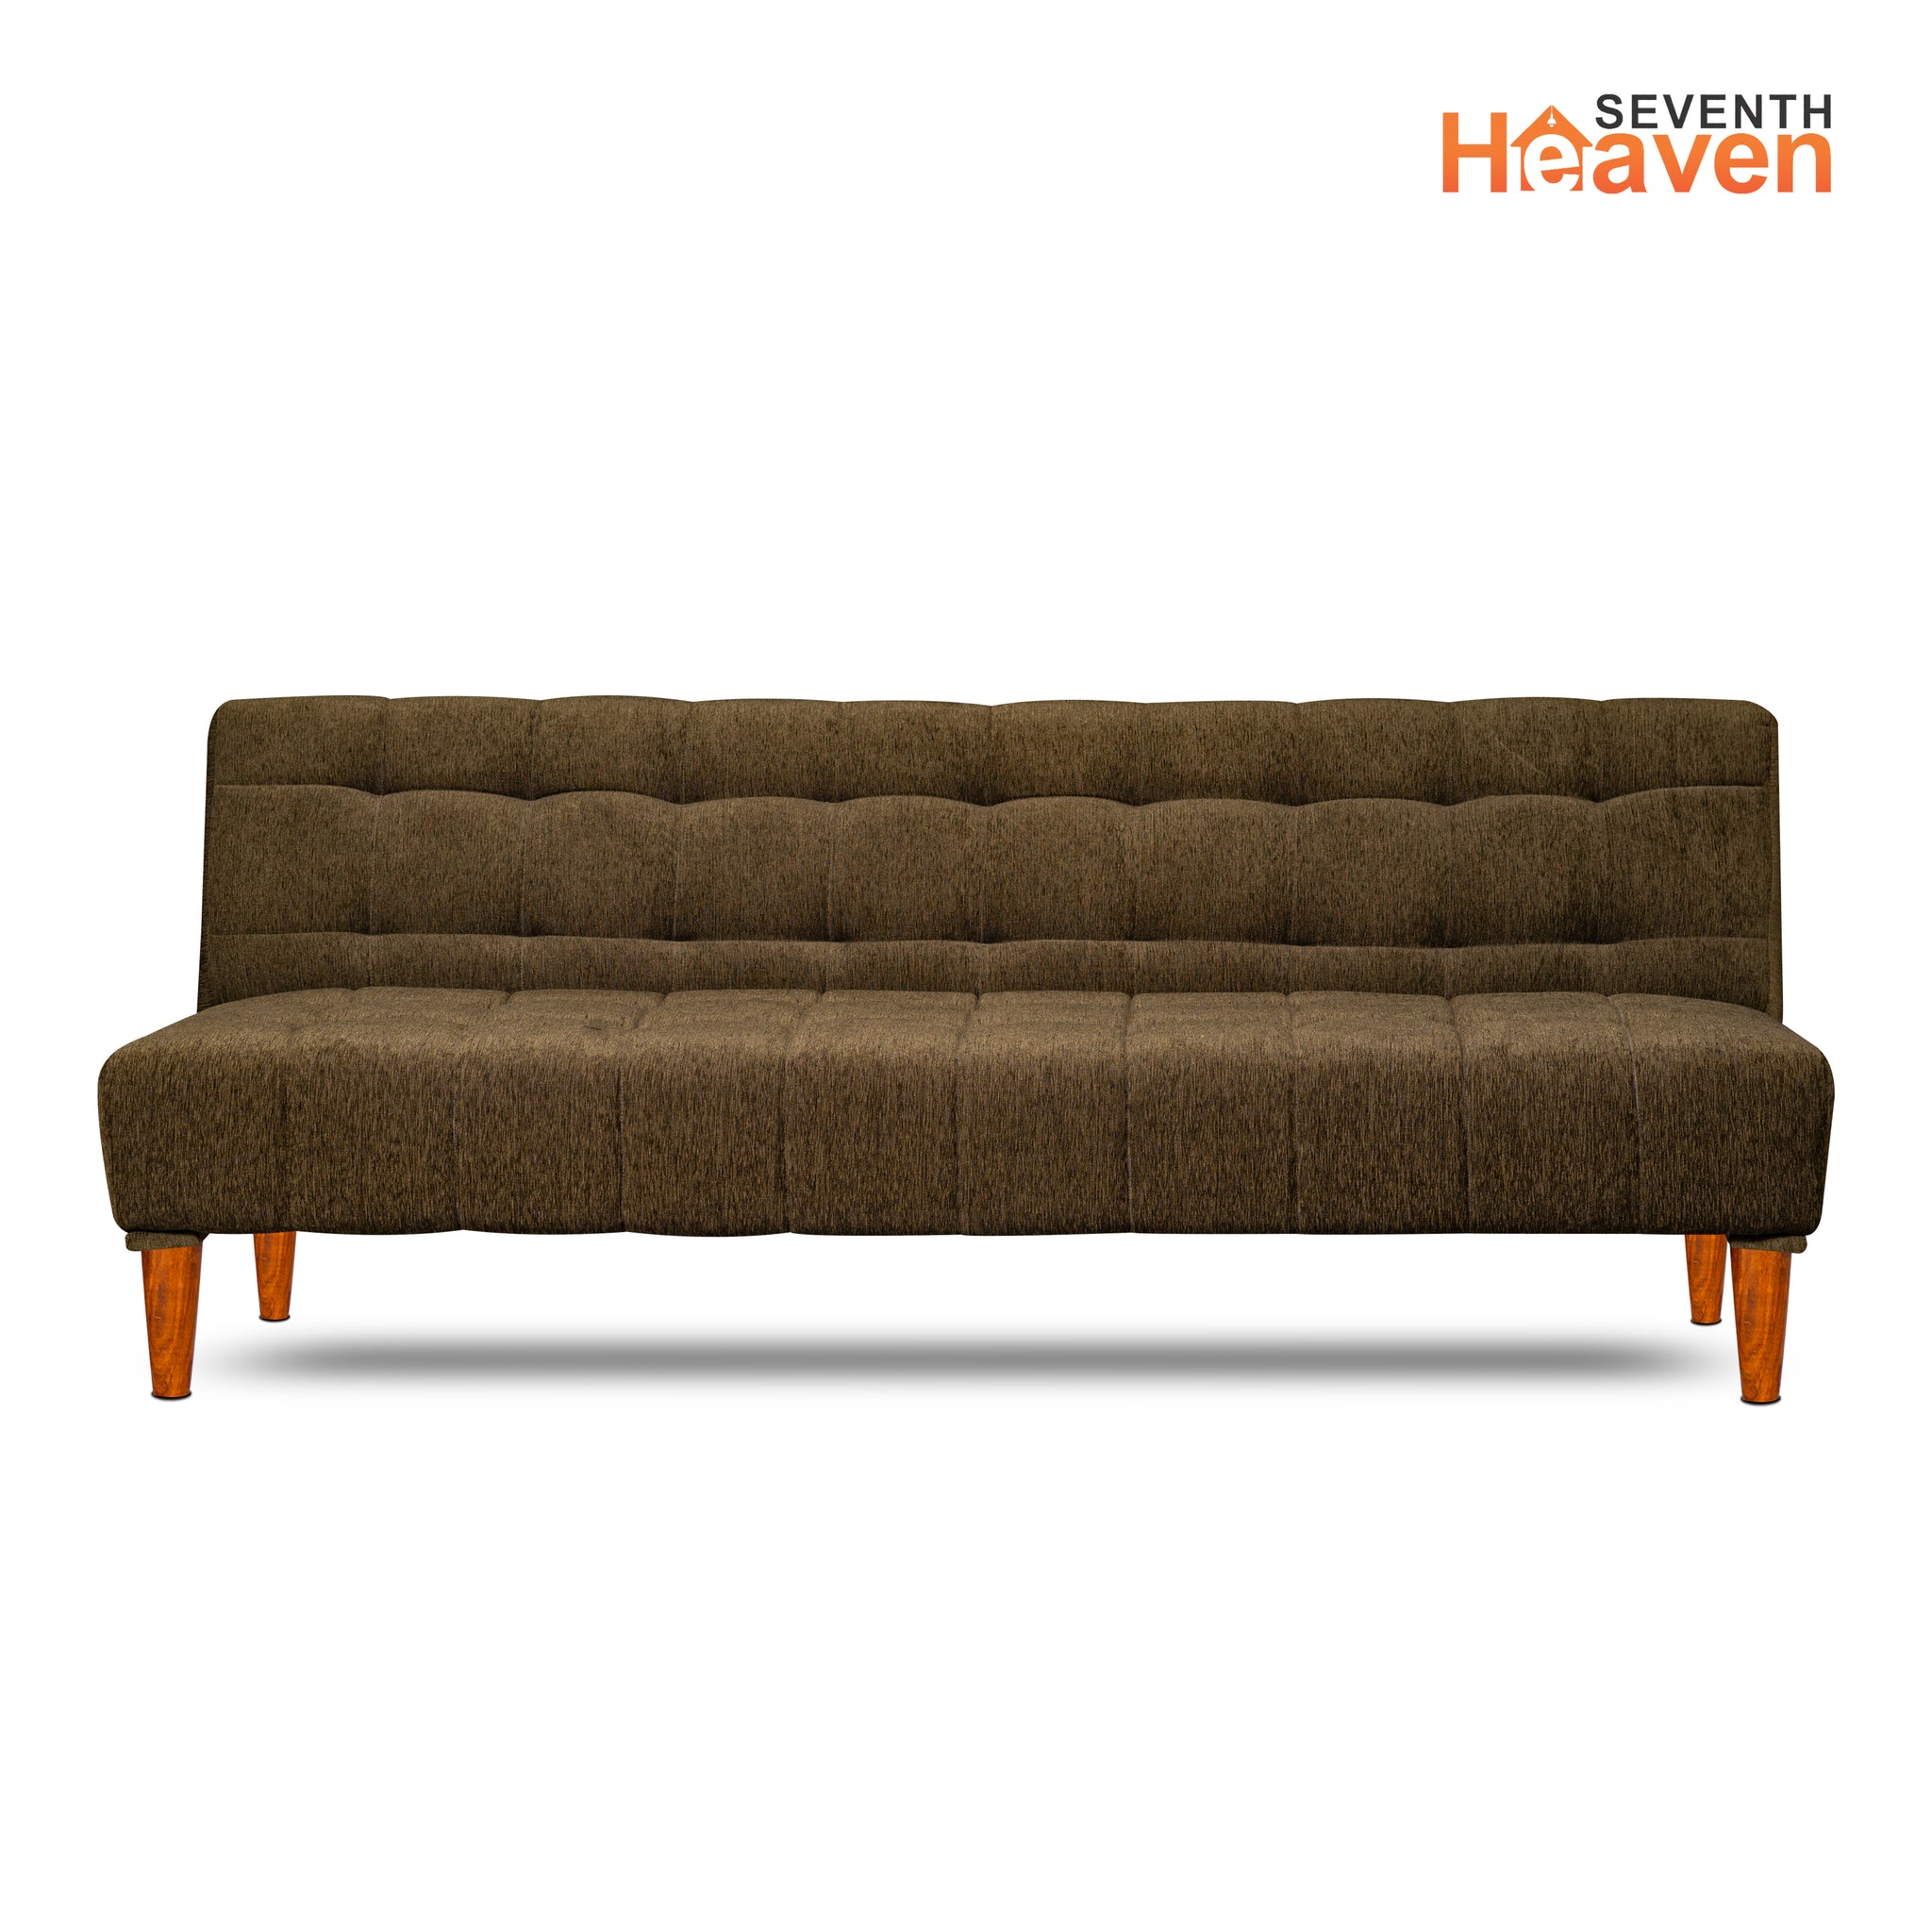 Seventh Heaven Florida Neo 4 Seater Wooden Sofa Cum Bed Modern & Elegant Smart Furniture Range for luxurious homes, living rooms and offices. Use as a sofa, lounger or bed. Perfect for guests. Molphino fabric with sheesham polished wooden legs. Green colour.